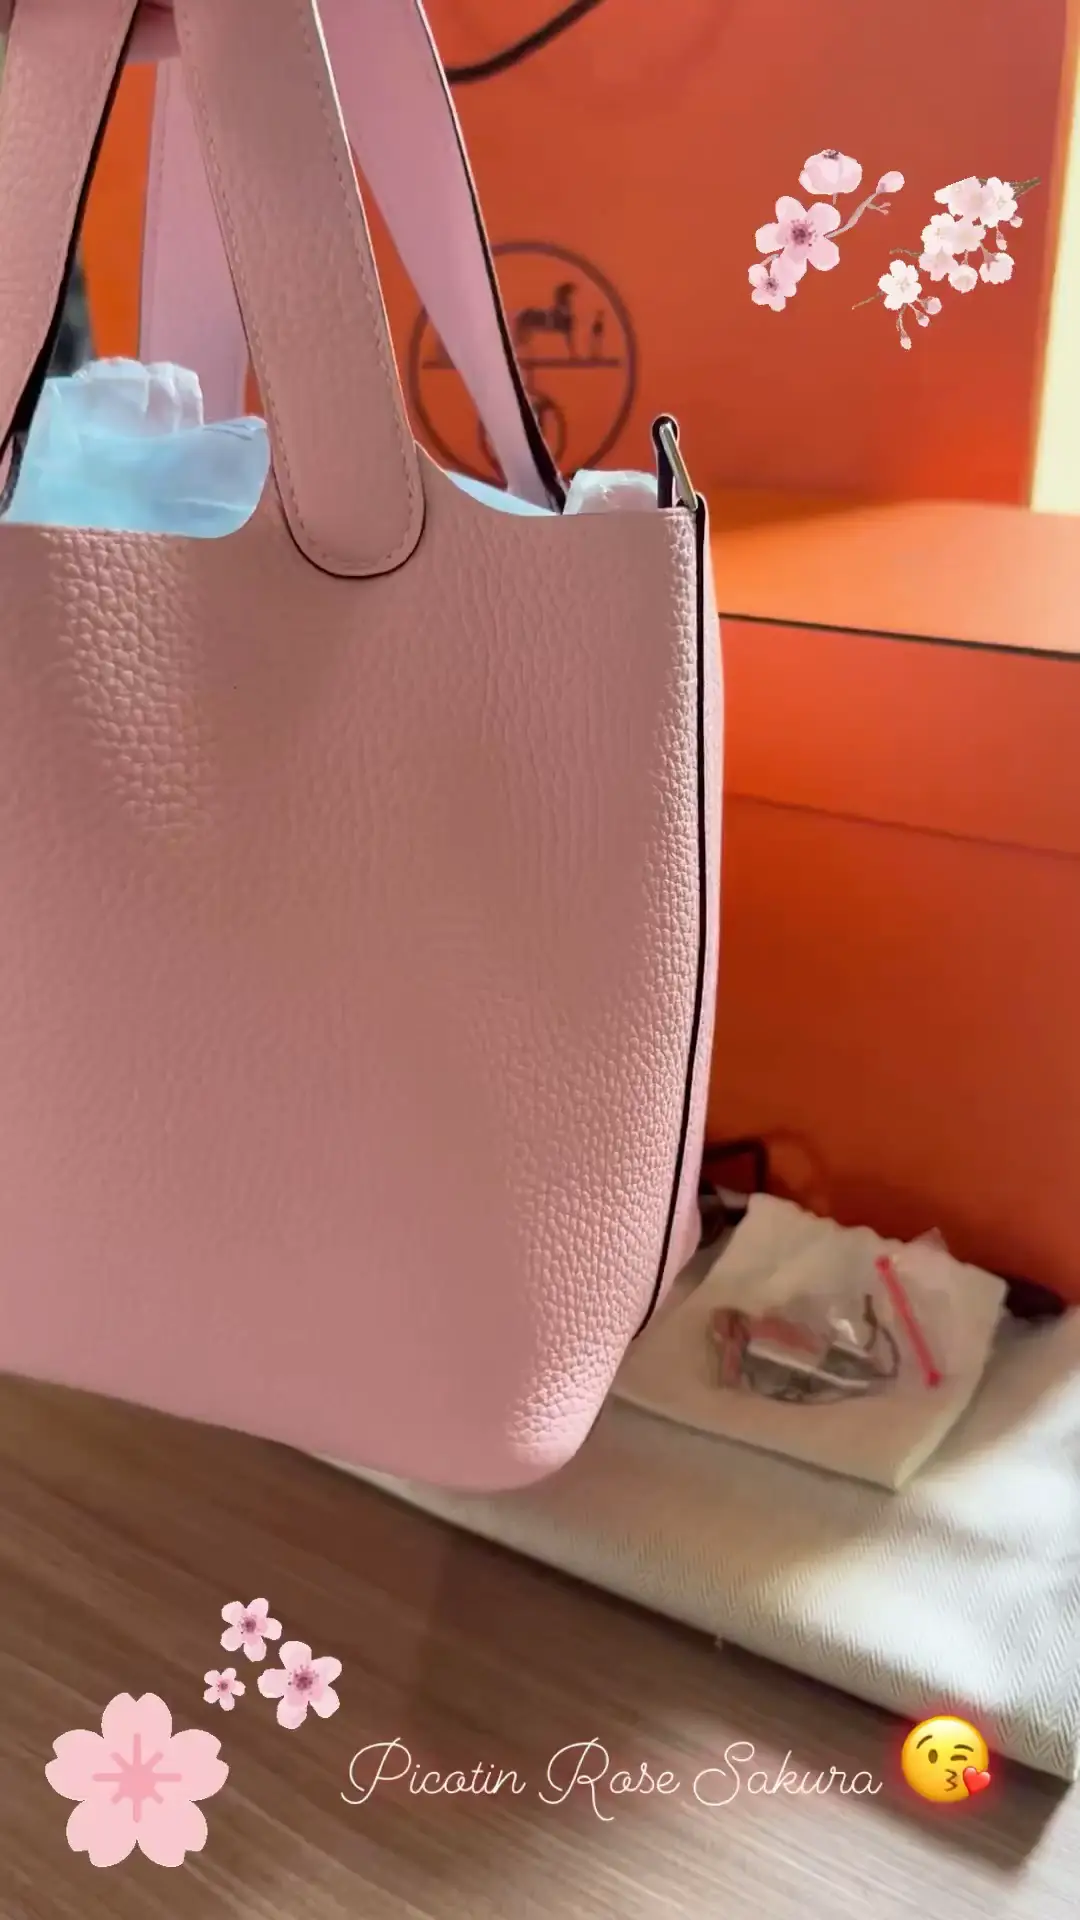 HERMES Picotin 18 BAG UNBOXING: First Hermes bag purchase and